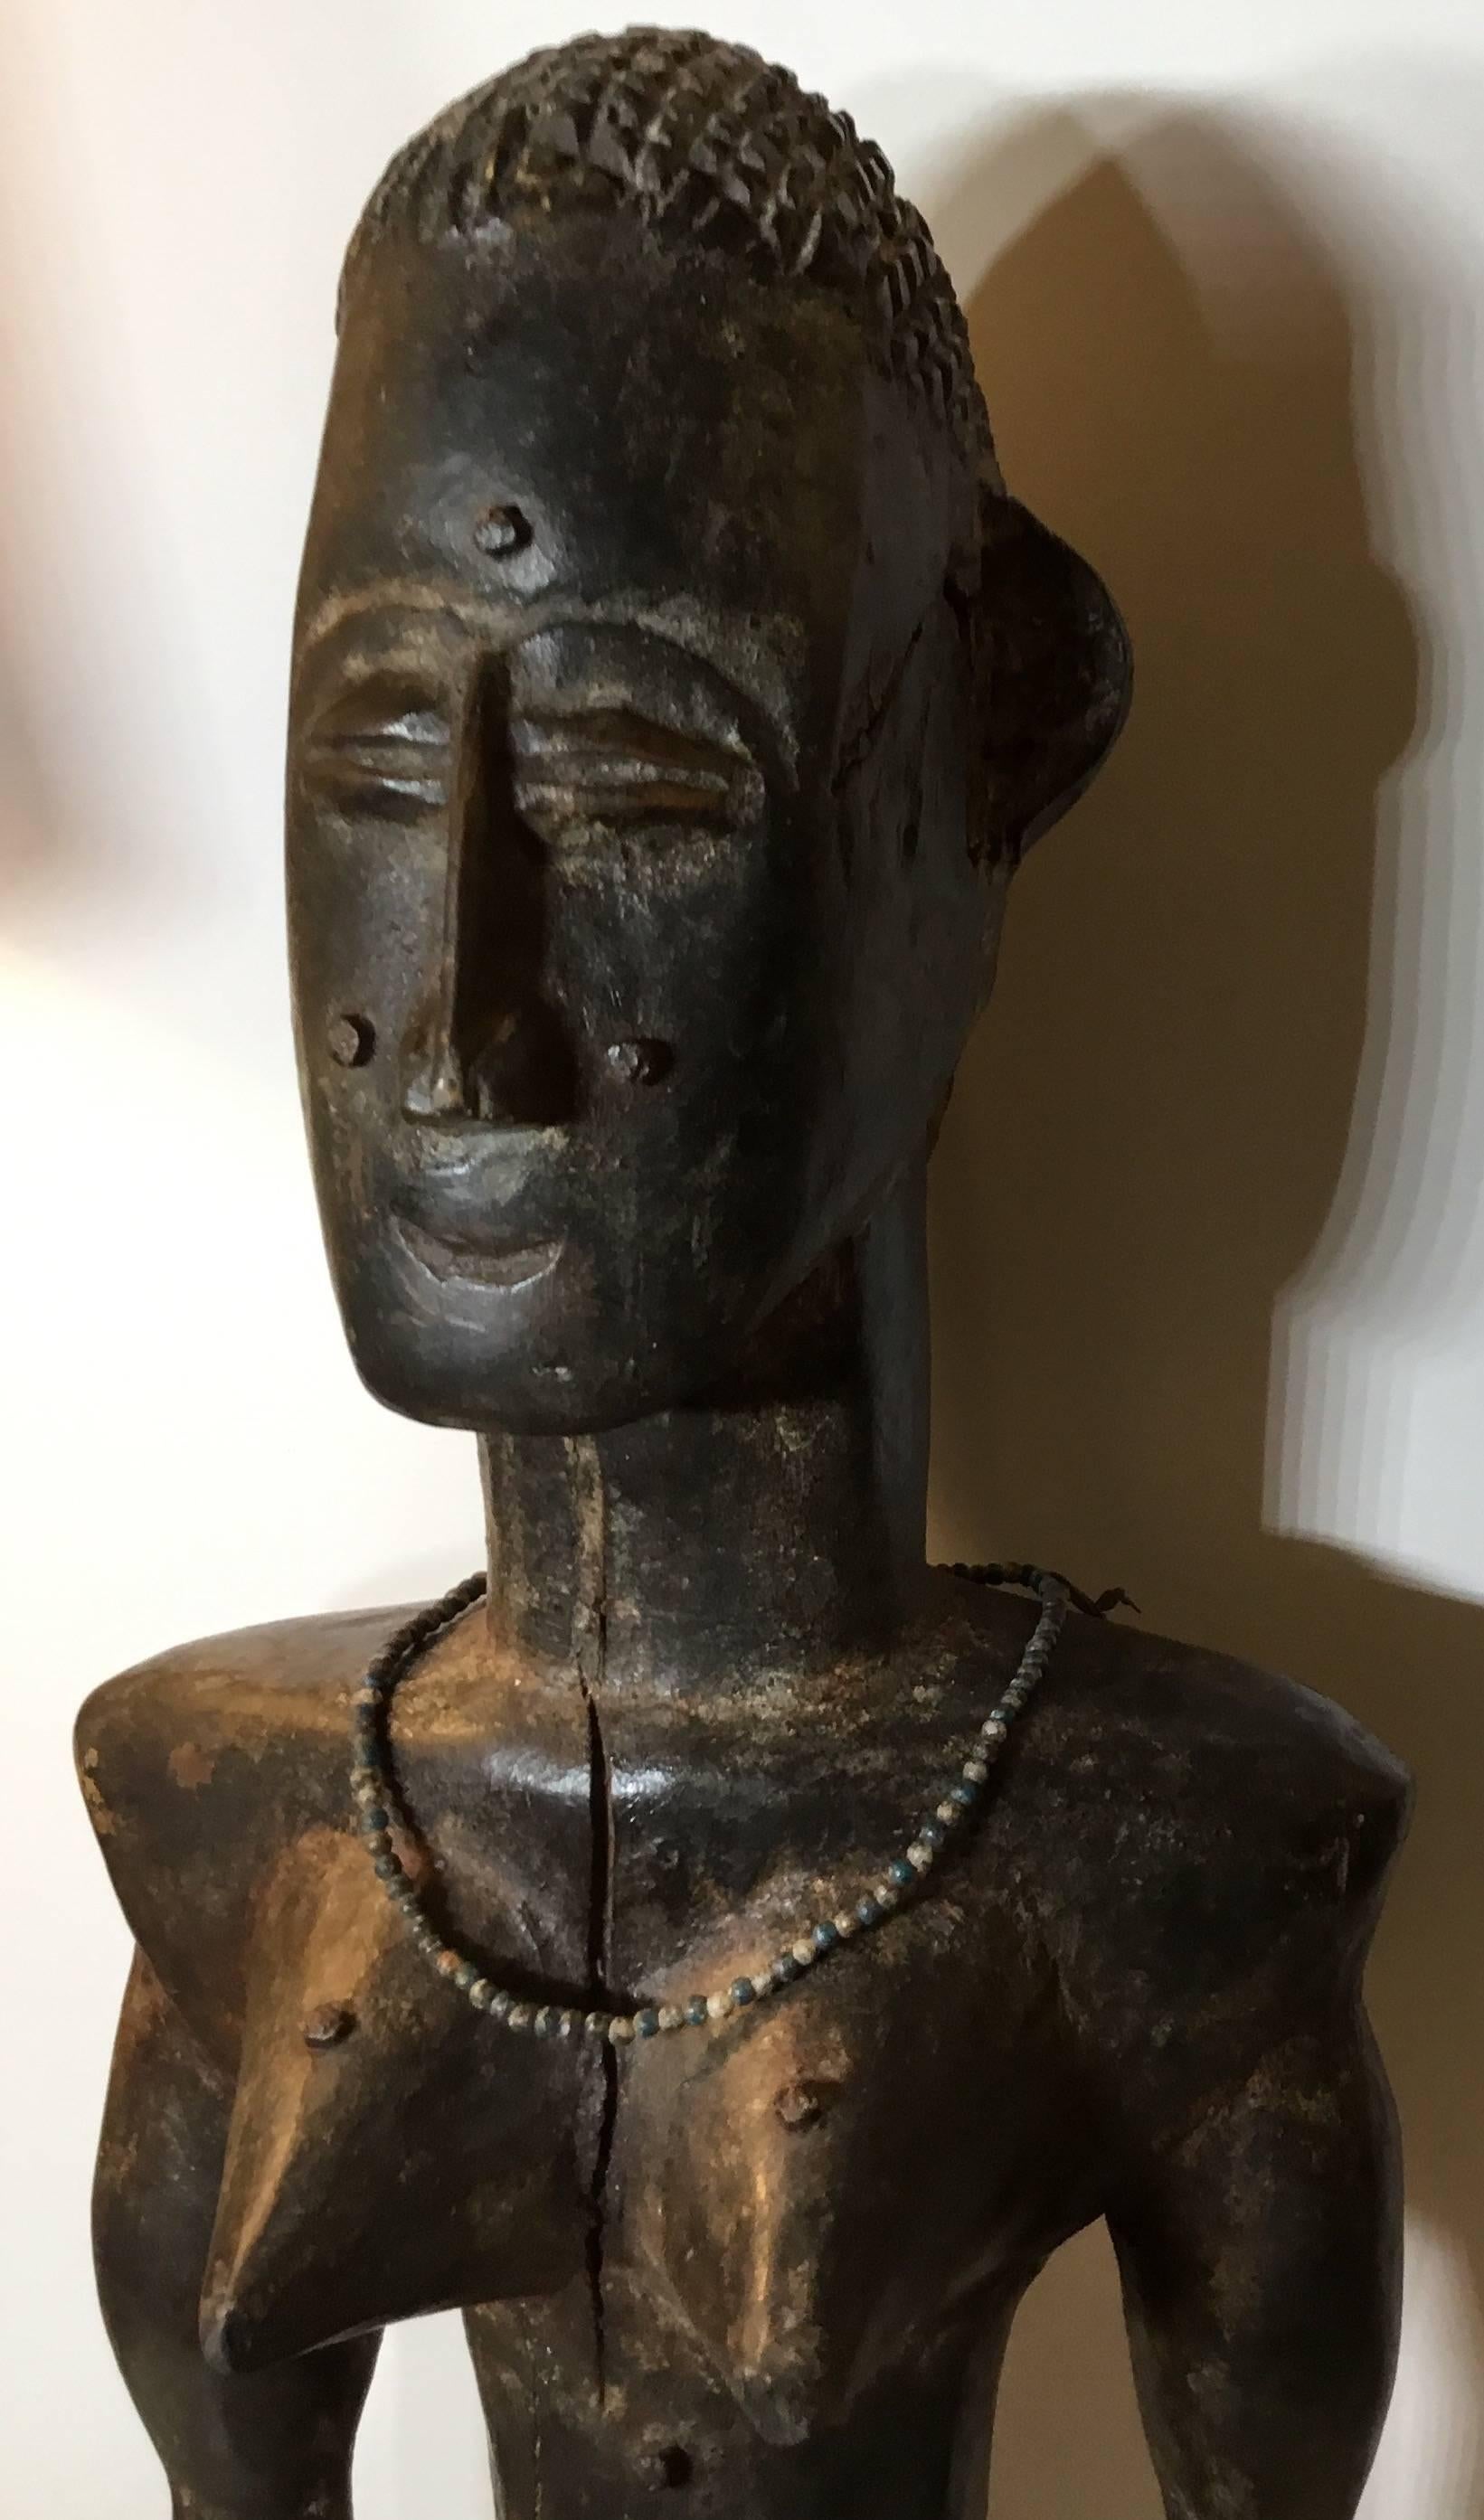  male figure made of carved wood depicting handsome warrior,
Elaborate details of the face, hair and body, with original beaded jewelry on the
Neck and hand. Split in the front due to age, otherwise very good condition.
Professionally mounted on a